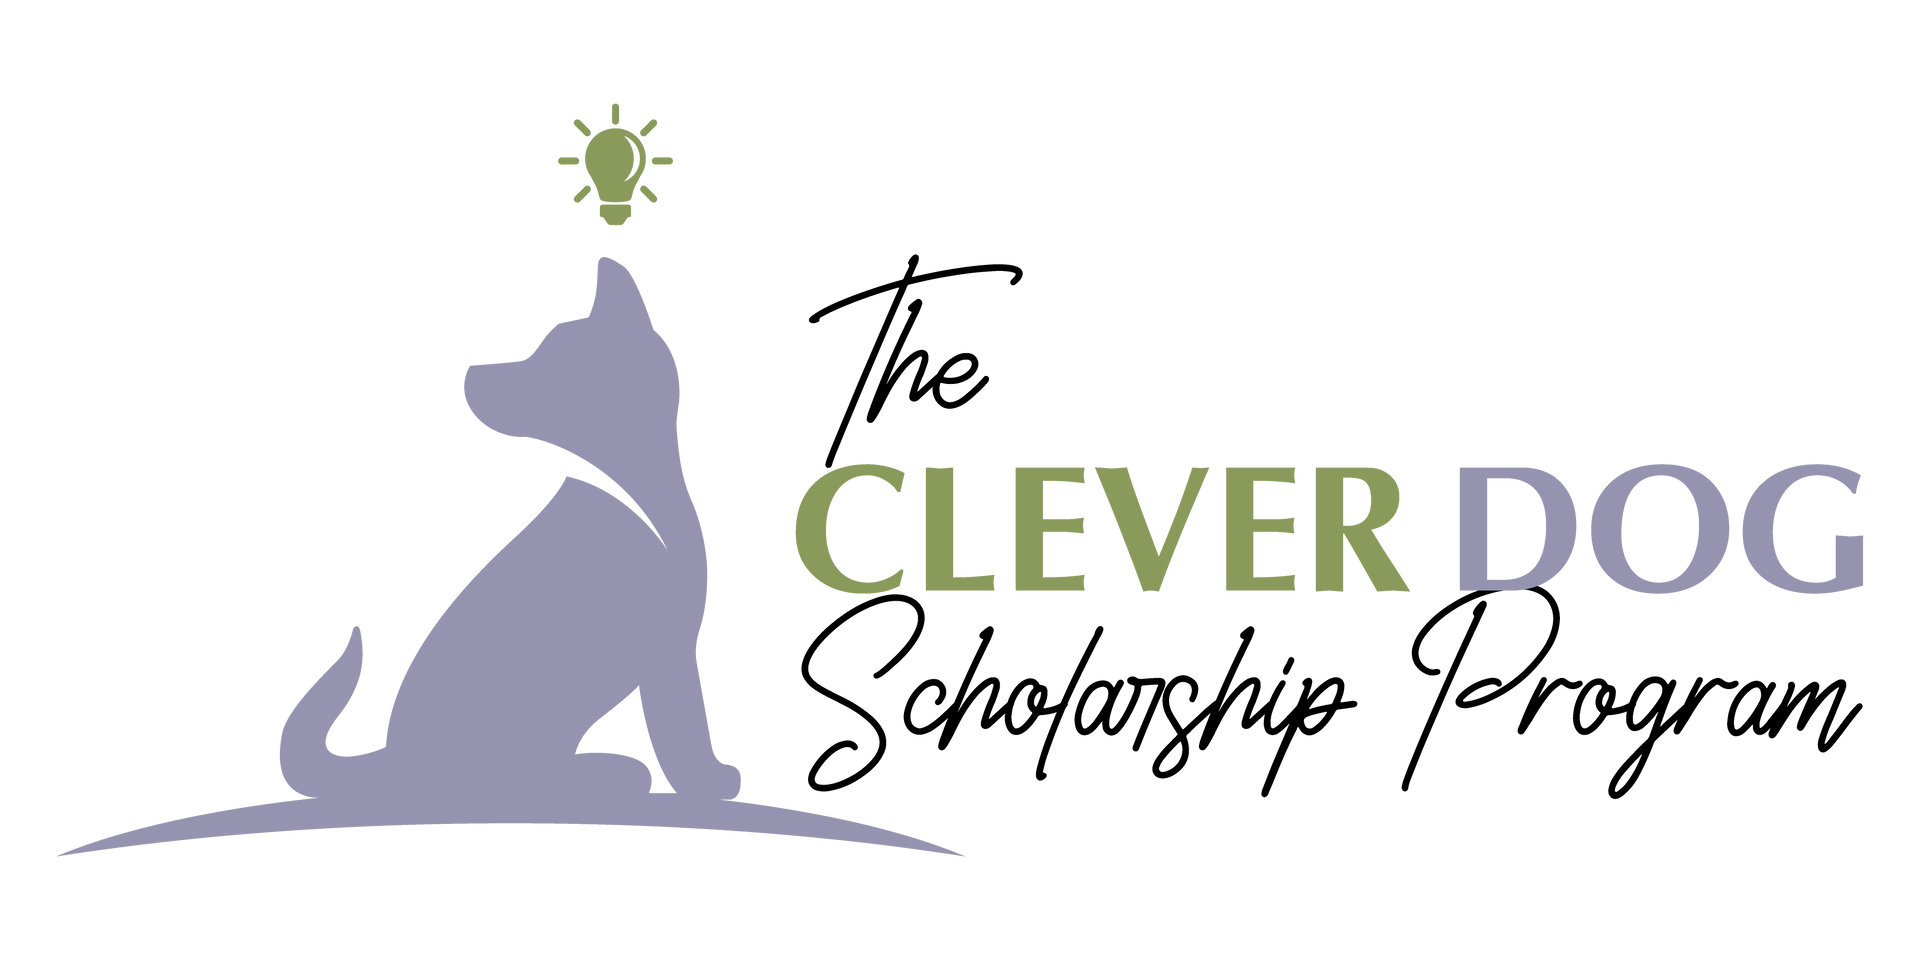 A logo for the clever dog scholarship program with a dog and a light bulb.